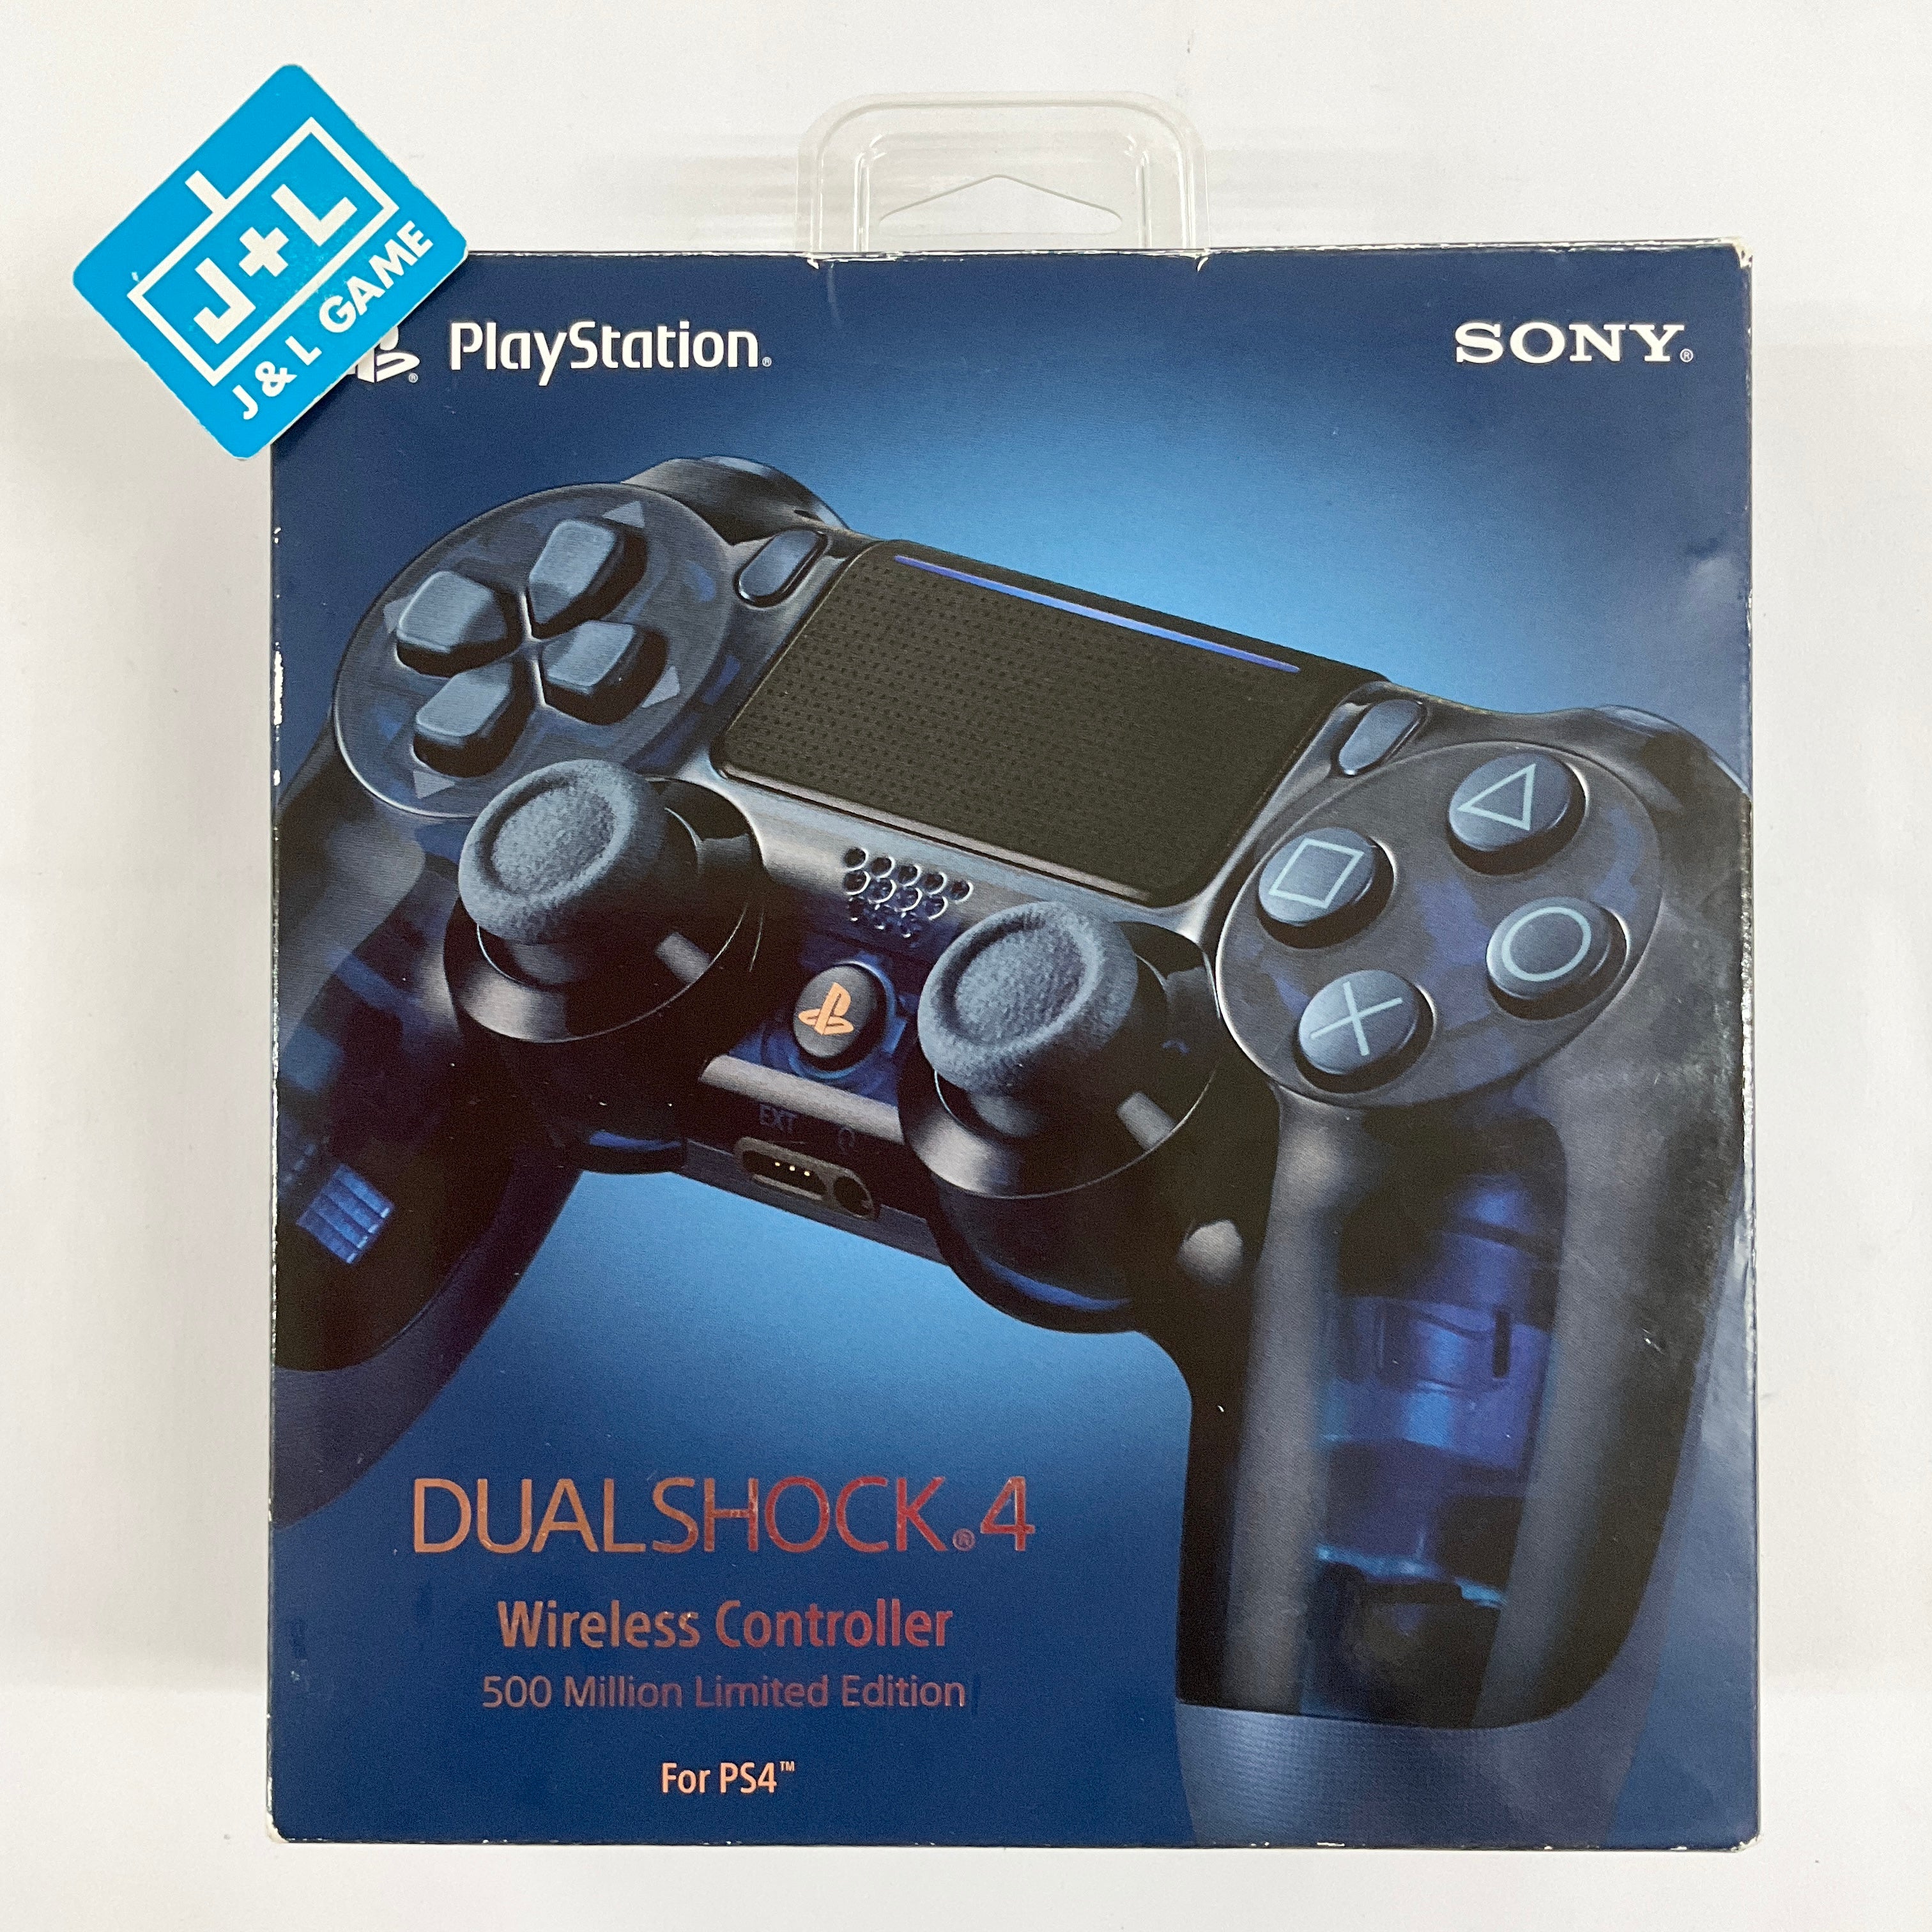 SONY DualShock 4 Wireless Controller (500 Million Limited Edition) - (PS4) PlayStation 4 [Pre-Owned] Accessories Sony   